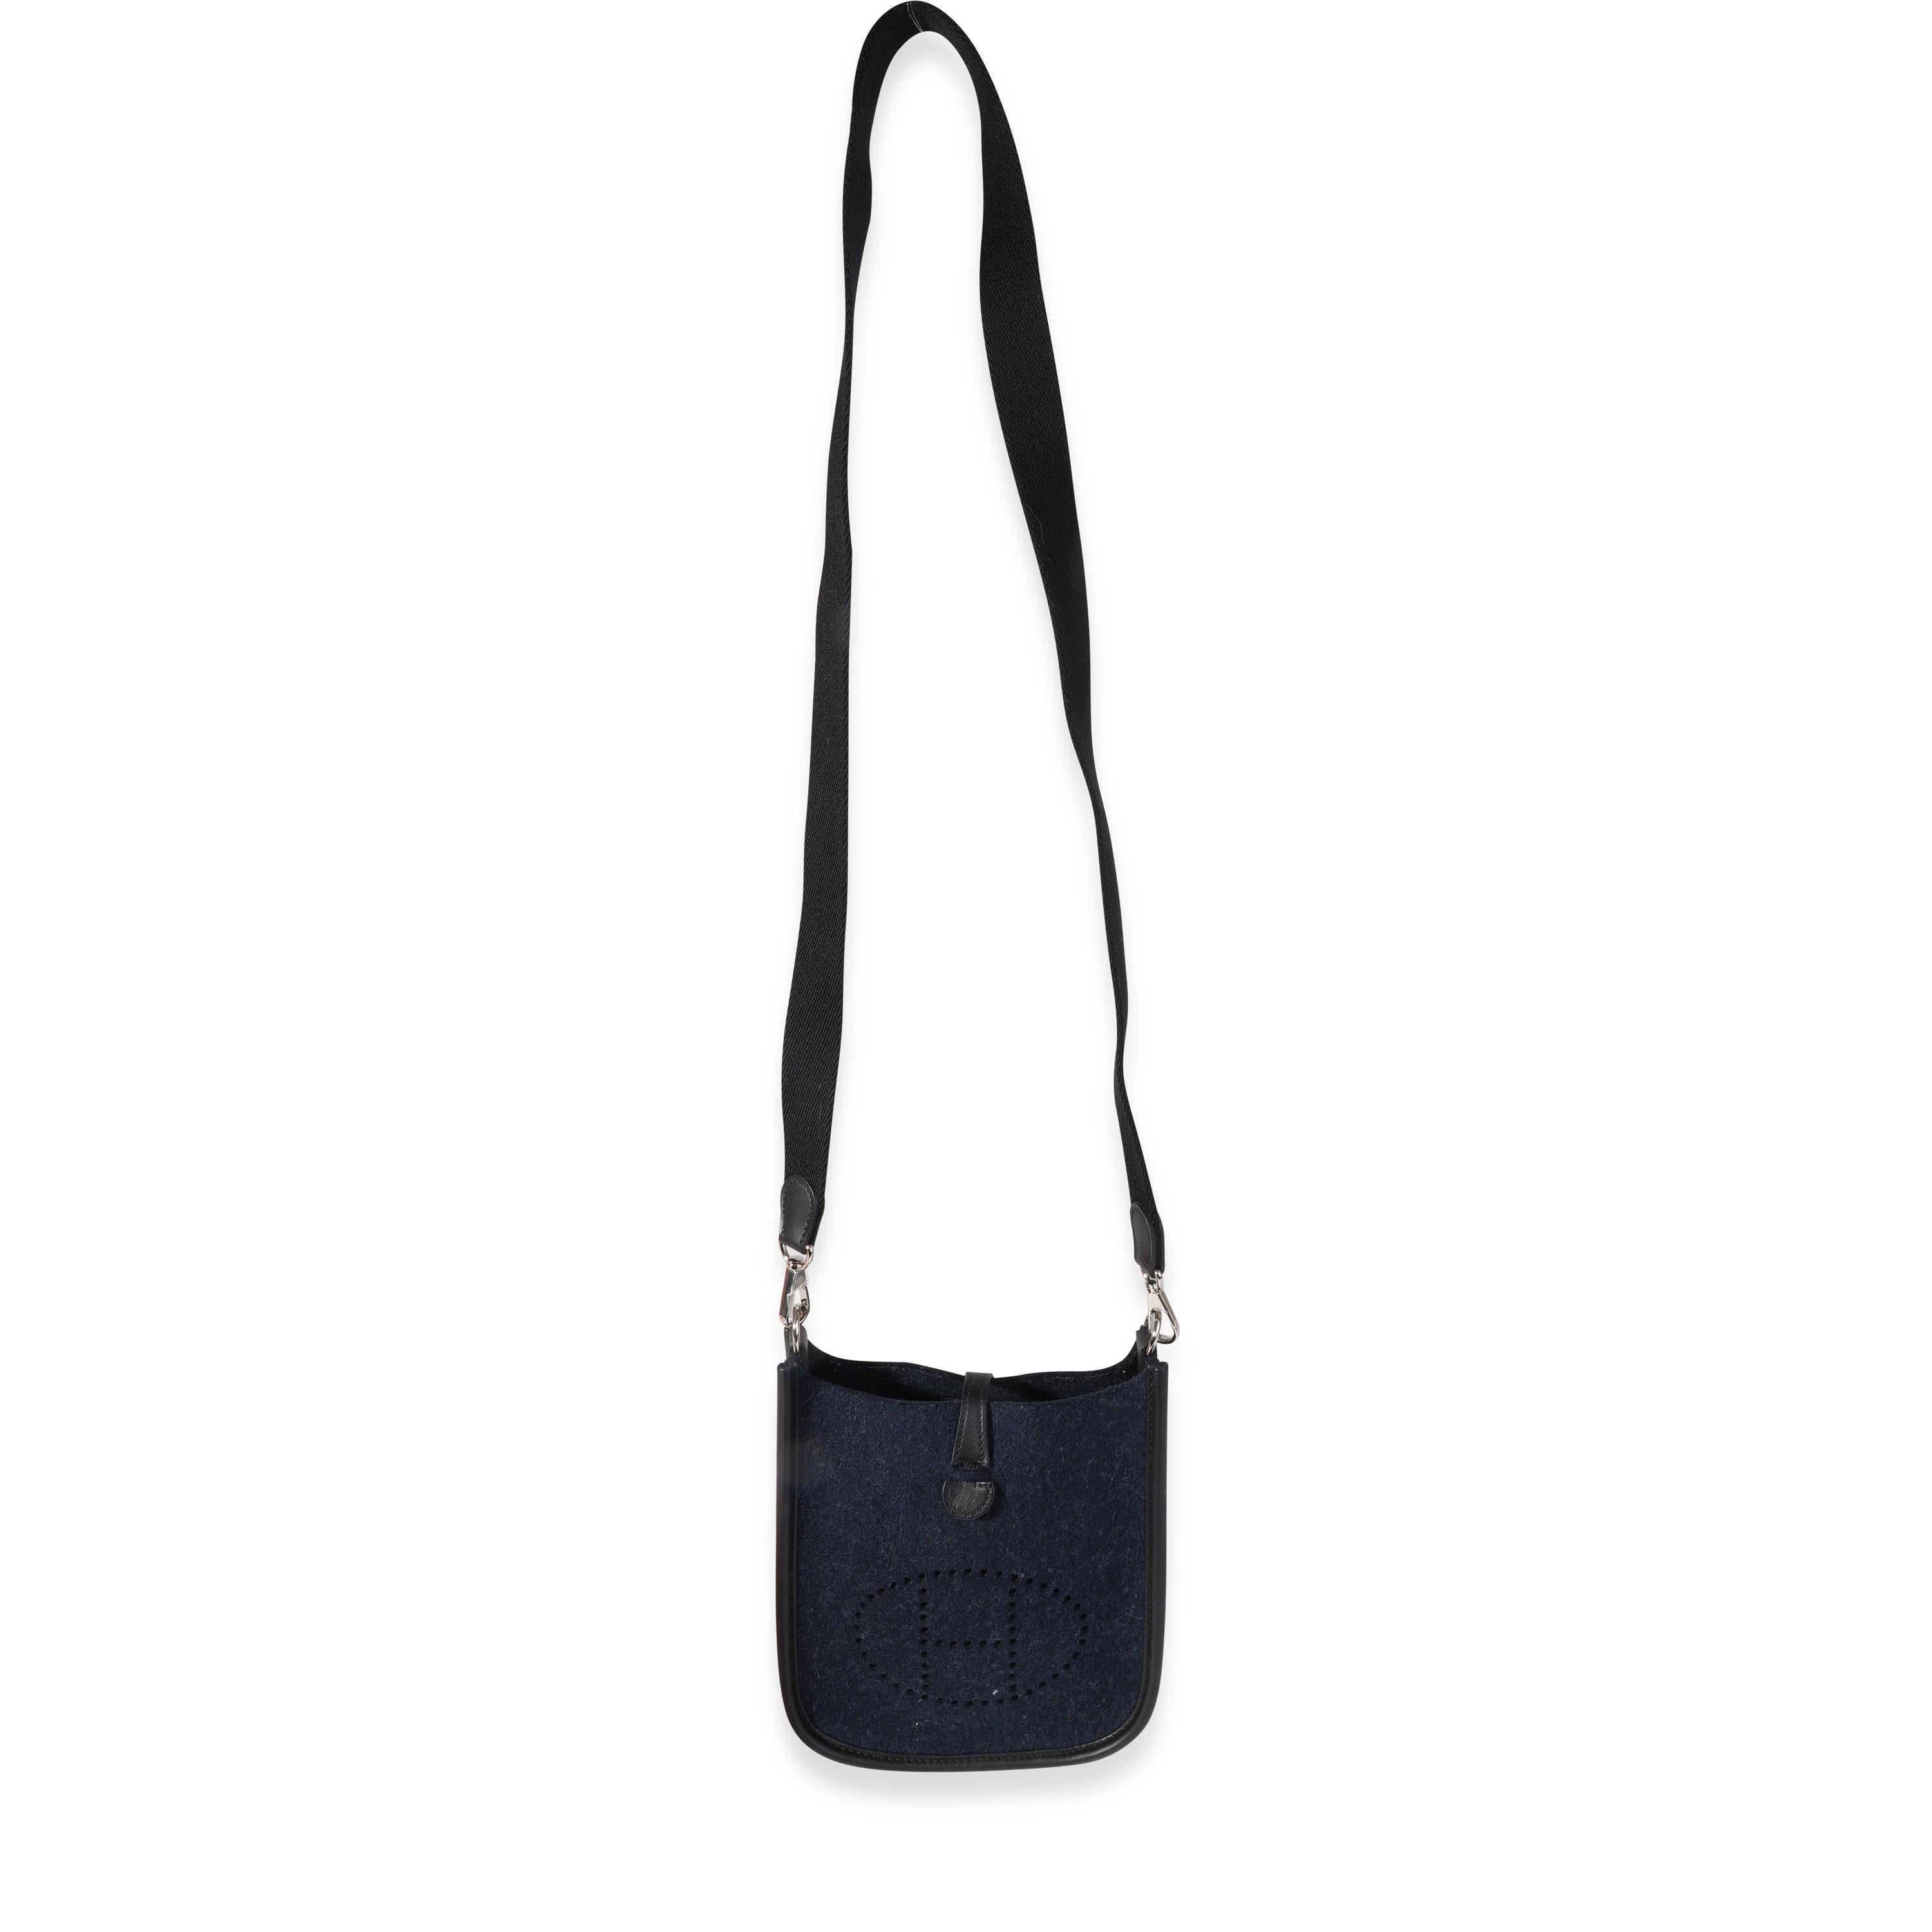 Listing Title: Hermès Bleu Nuit Feutre & Black Swift Evelyne TPM PHW
SKU: 119828
Condition: Pre-owned (3000)
Handbag Condition: Excellent
Condition Comments: Excellent Condition. Light pilling to wool. No other visible signs of wear.
Brand: